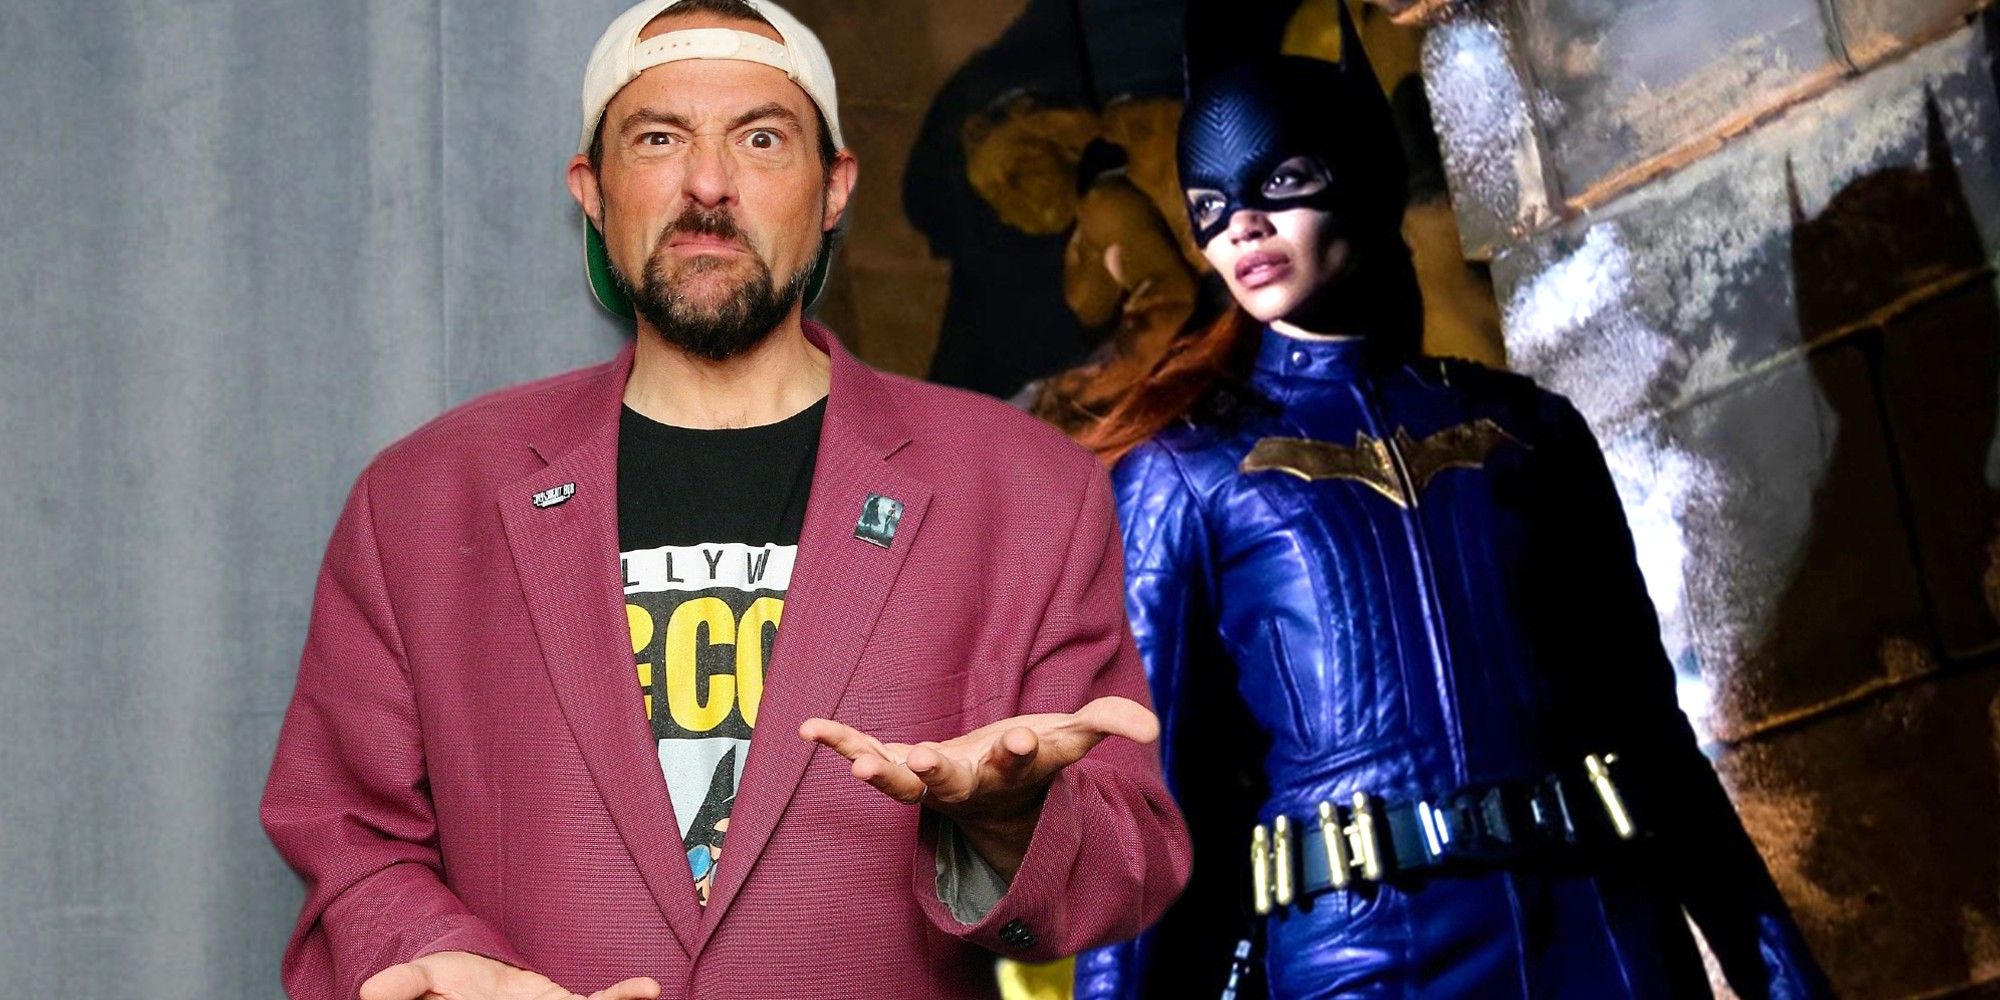 Kevin Smith imposed over image of Leslie Grace in costume as Batgirl